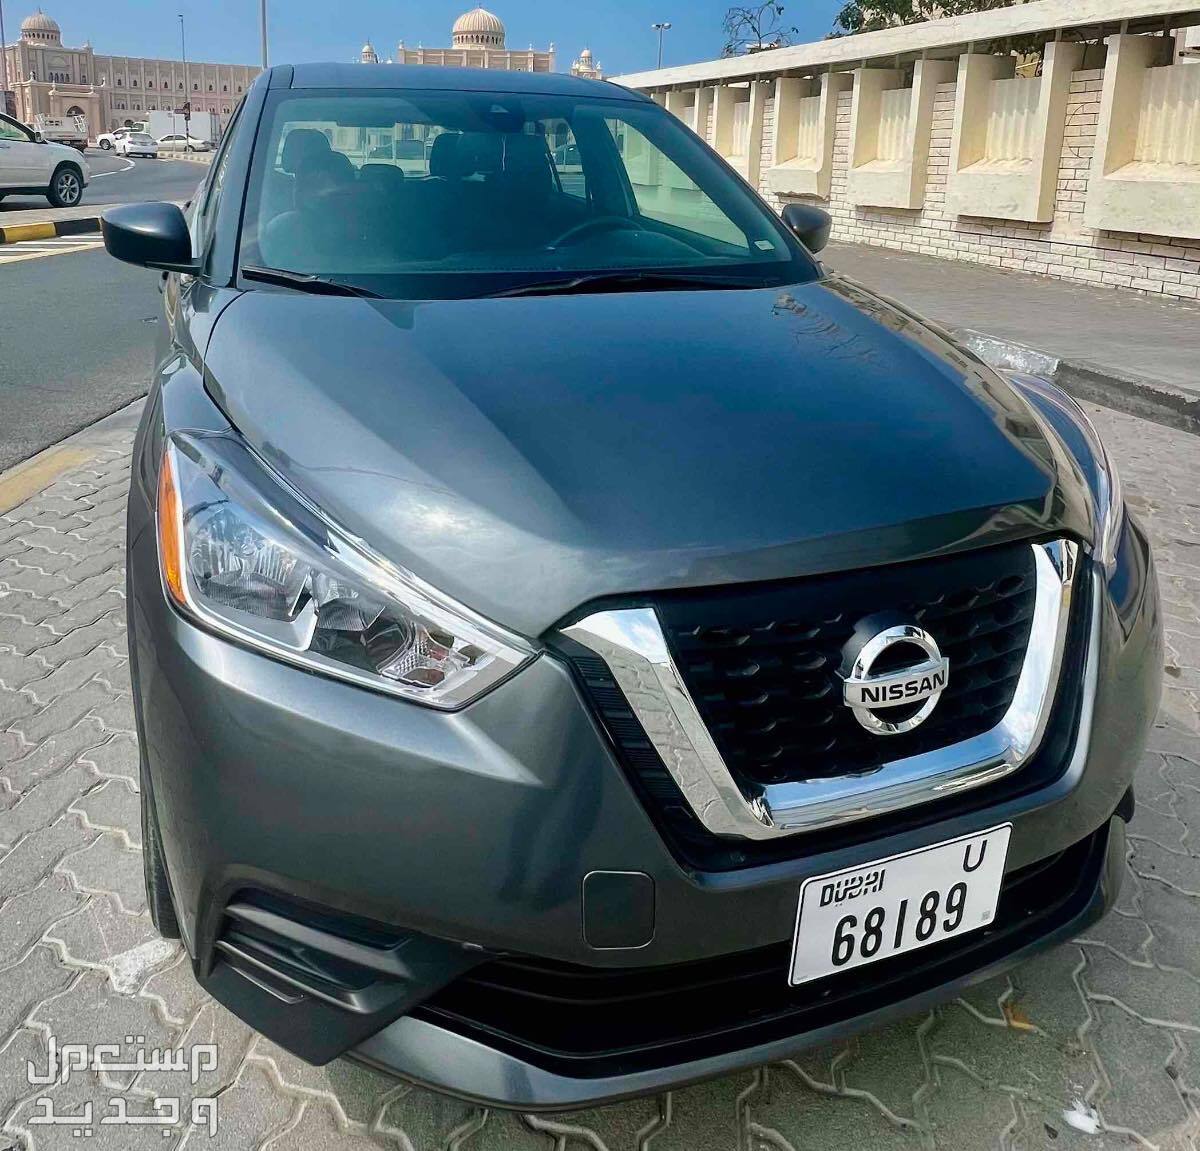 Nissan Kicks 2020 in Dubai at a price of 38 thousands AED